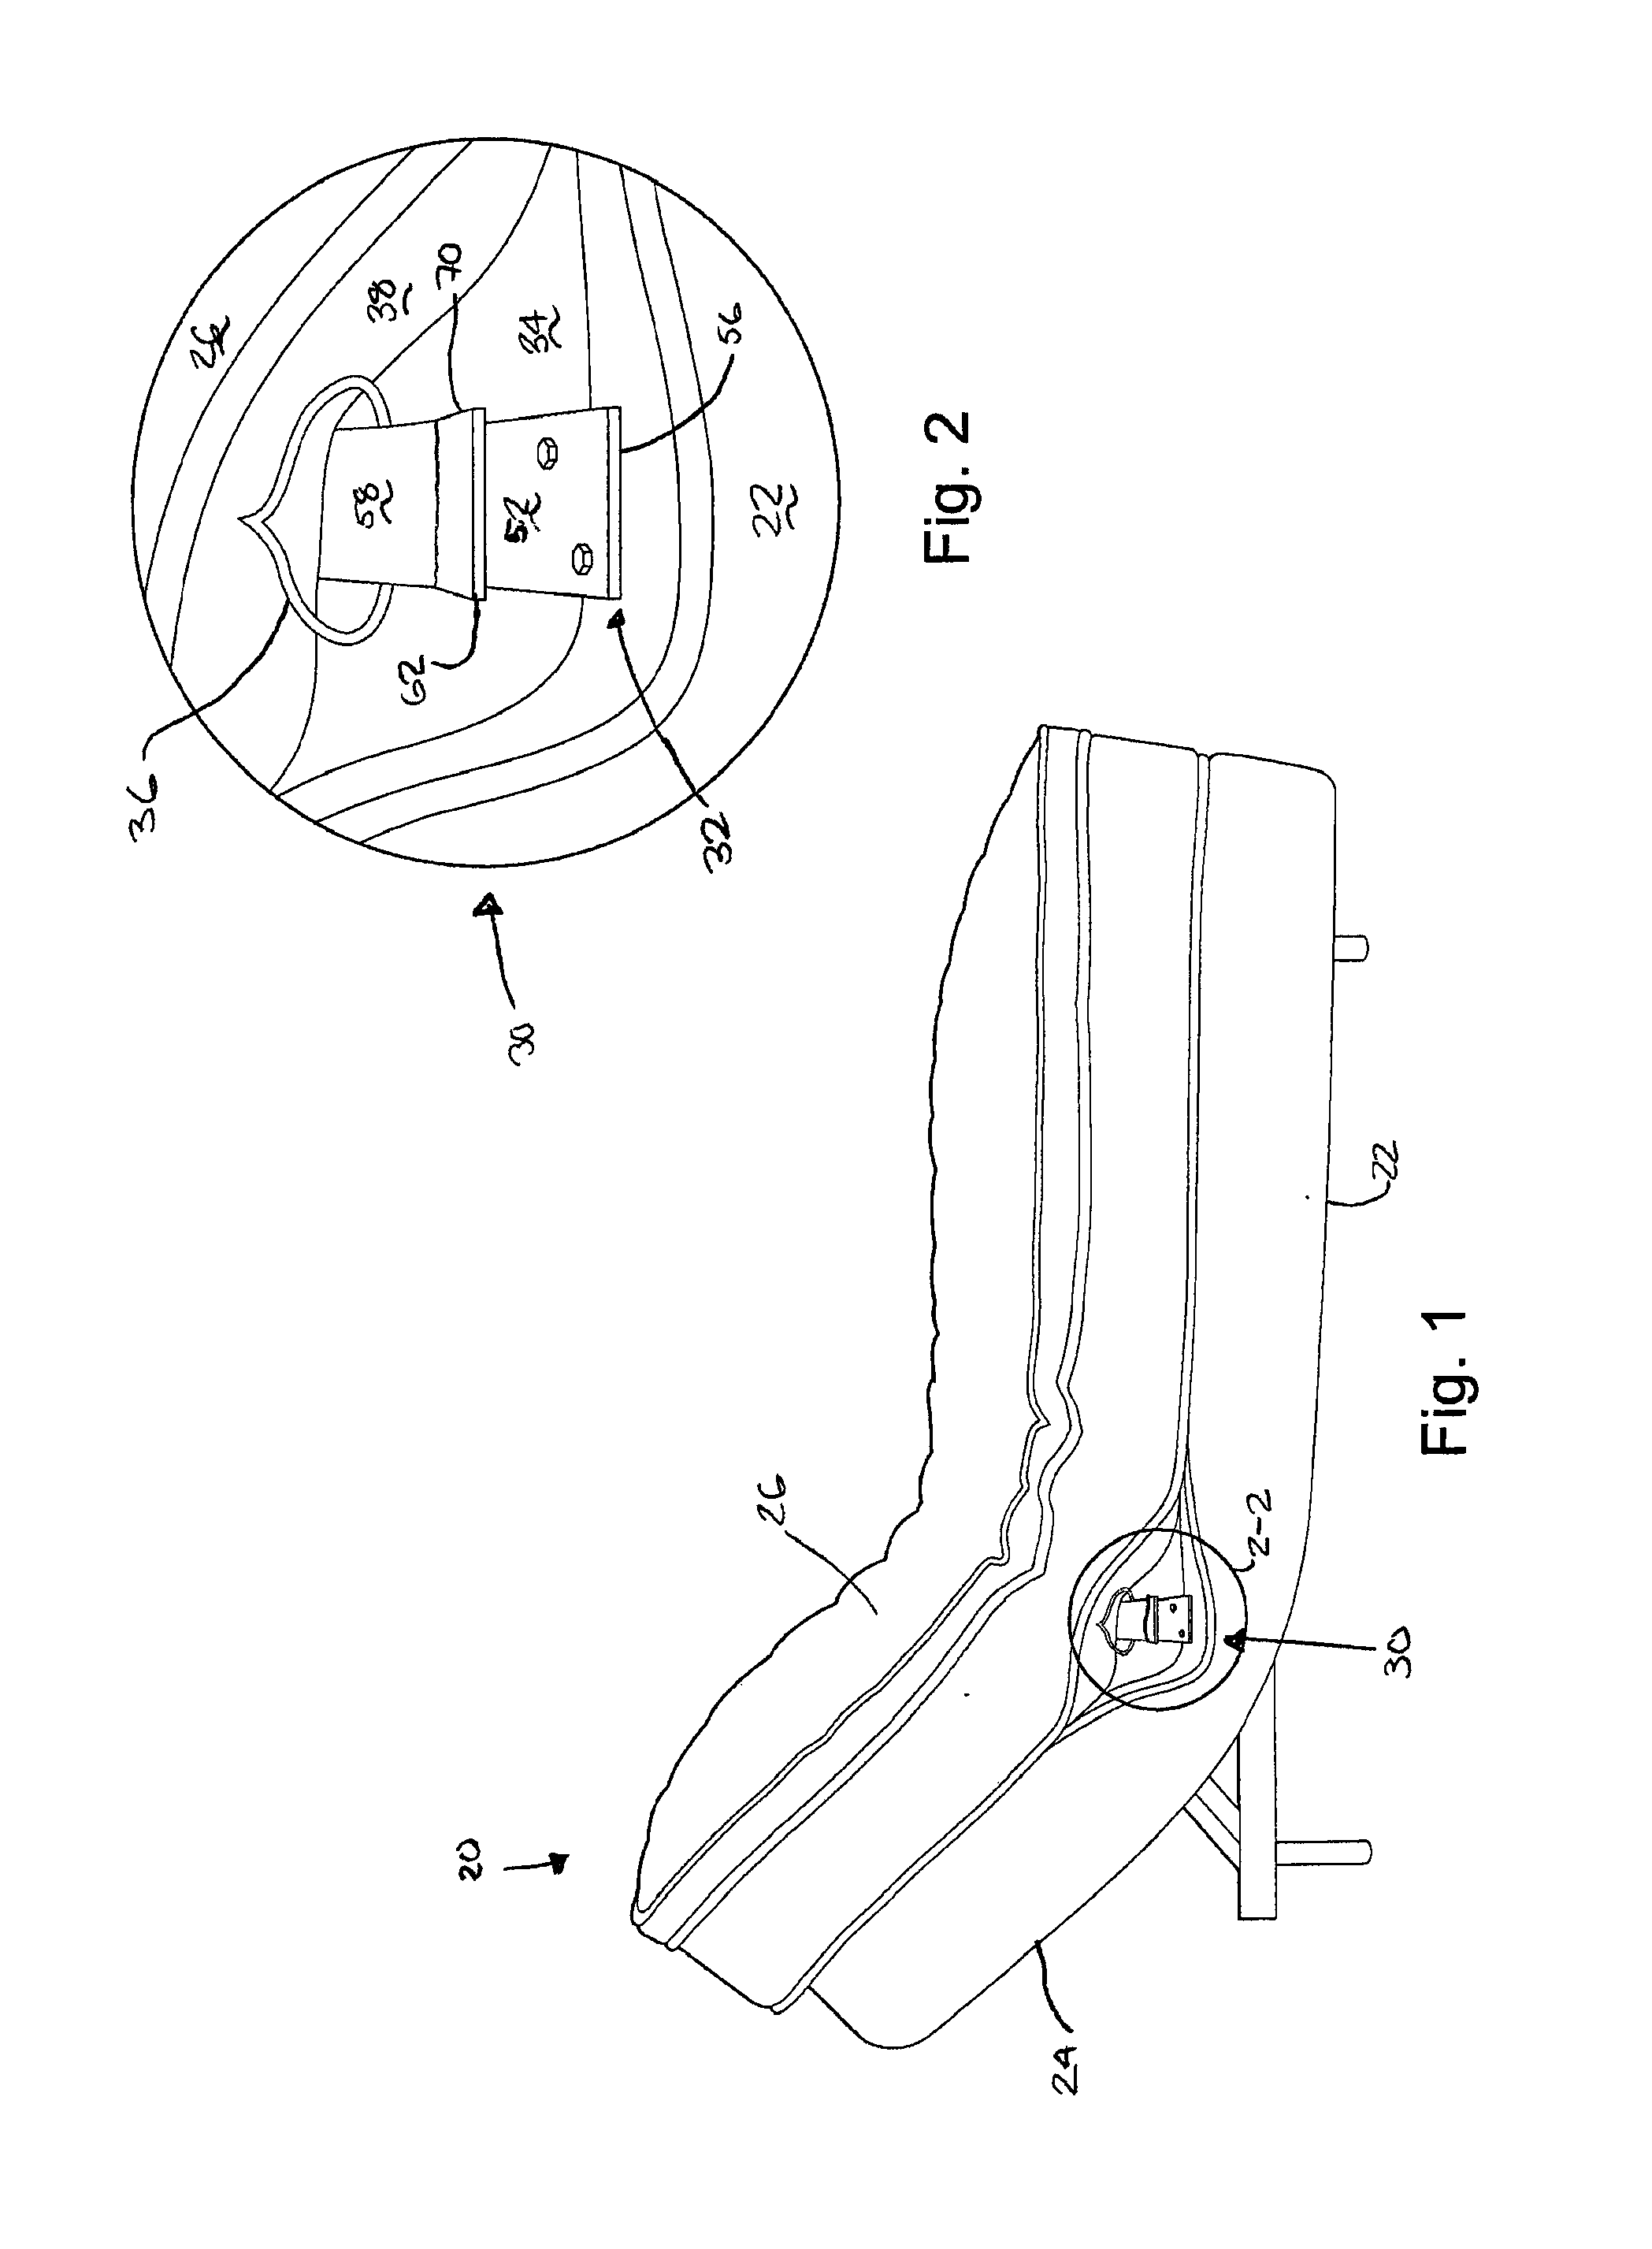 Bed with an Apparatus for Securing an Adjustable Base Support to a Mattress